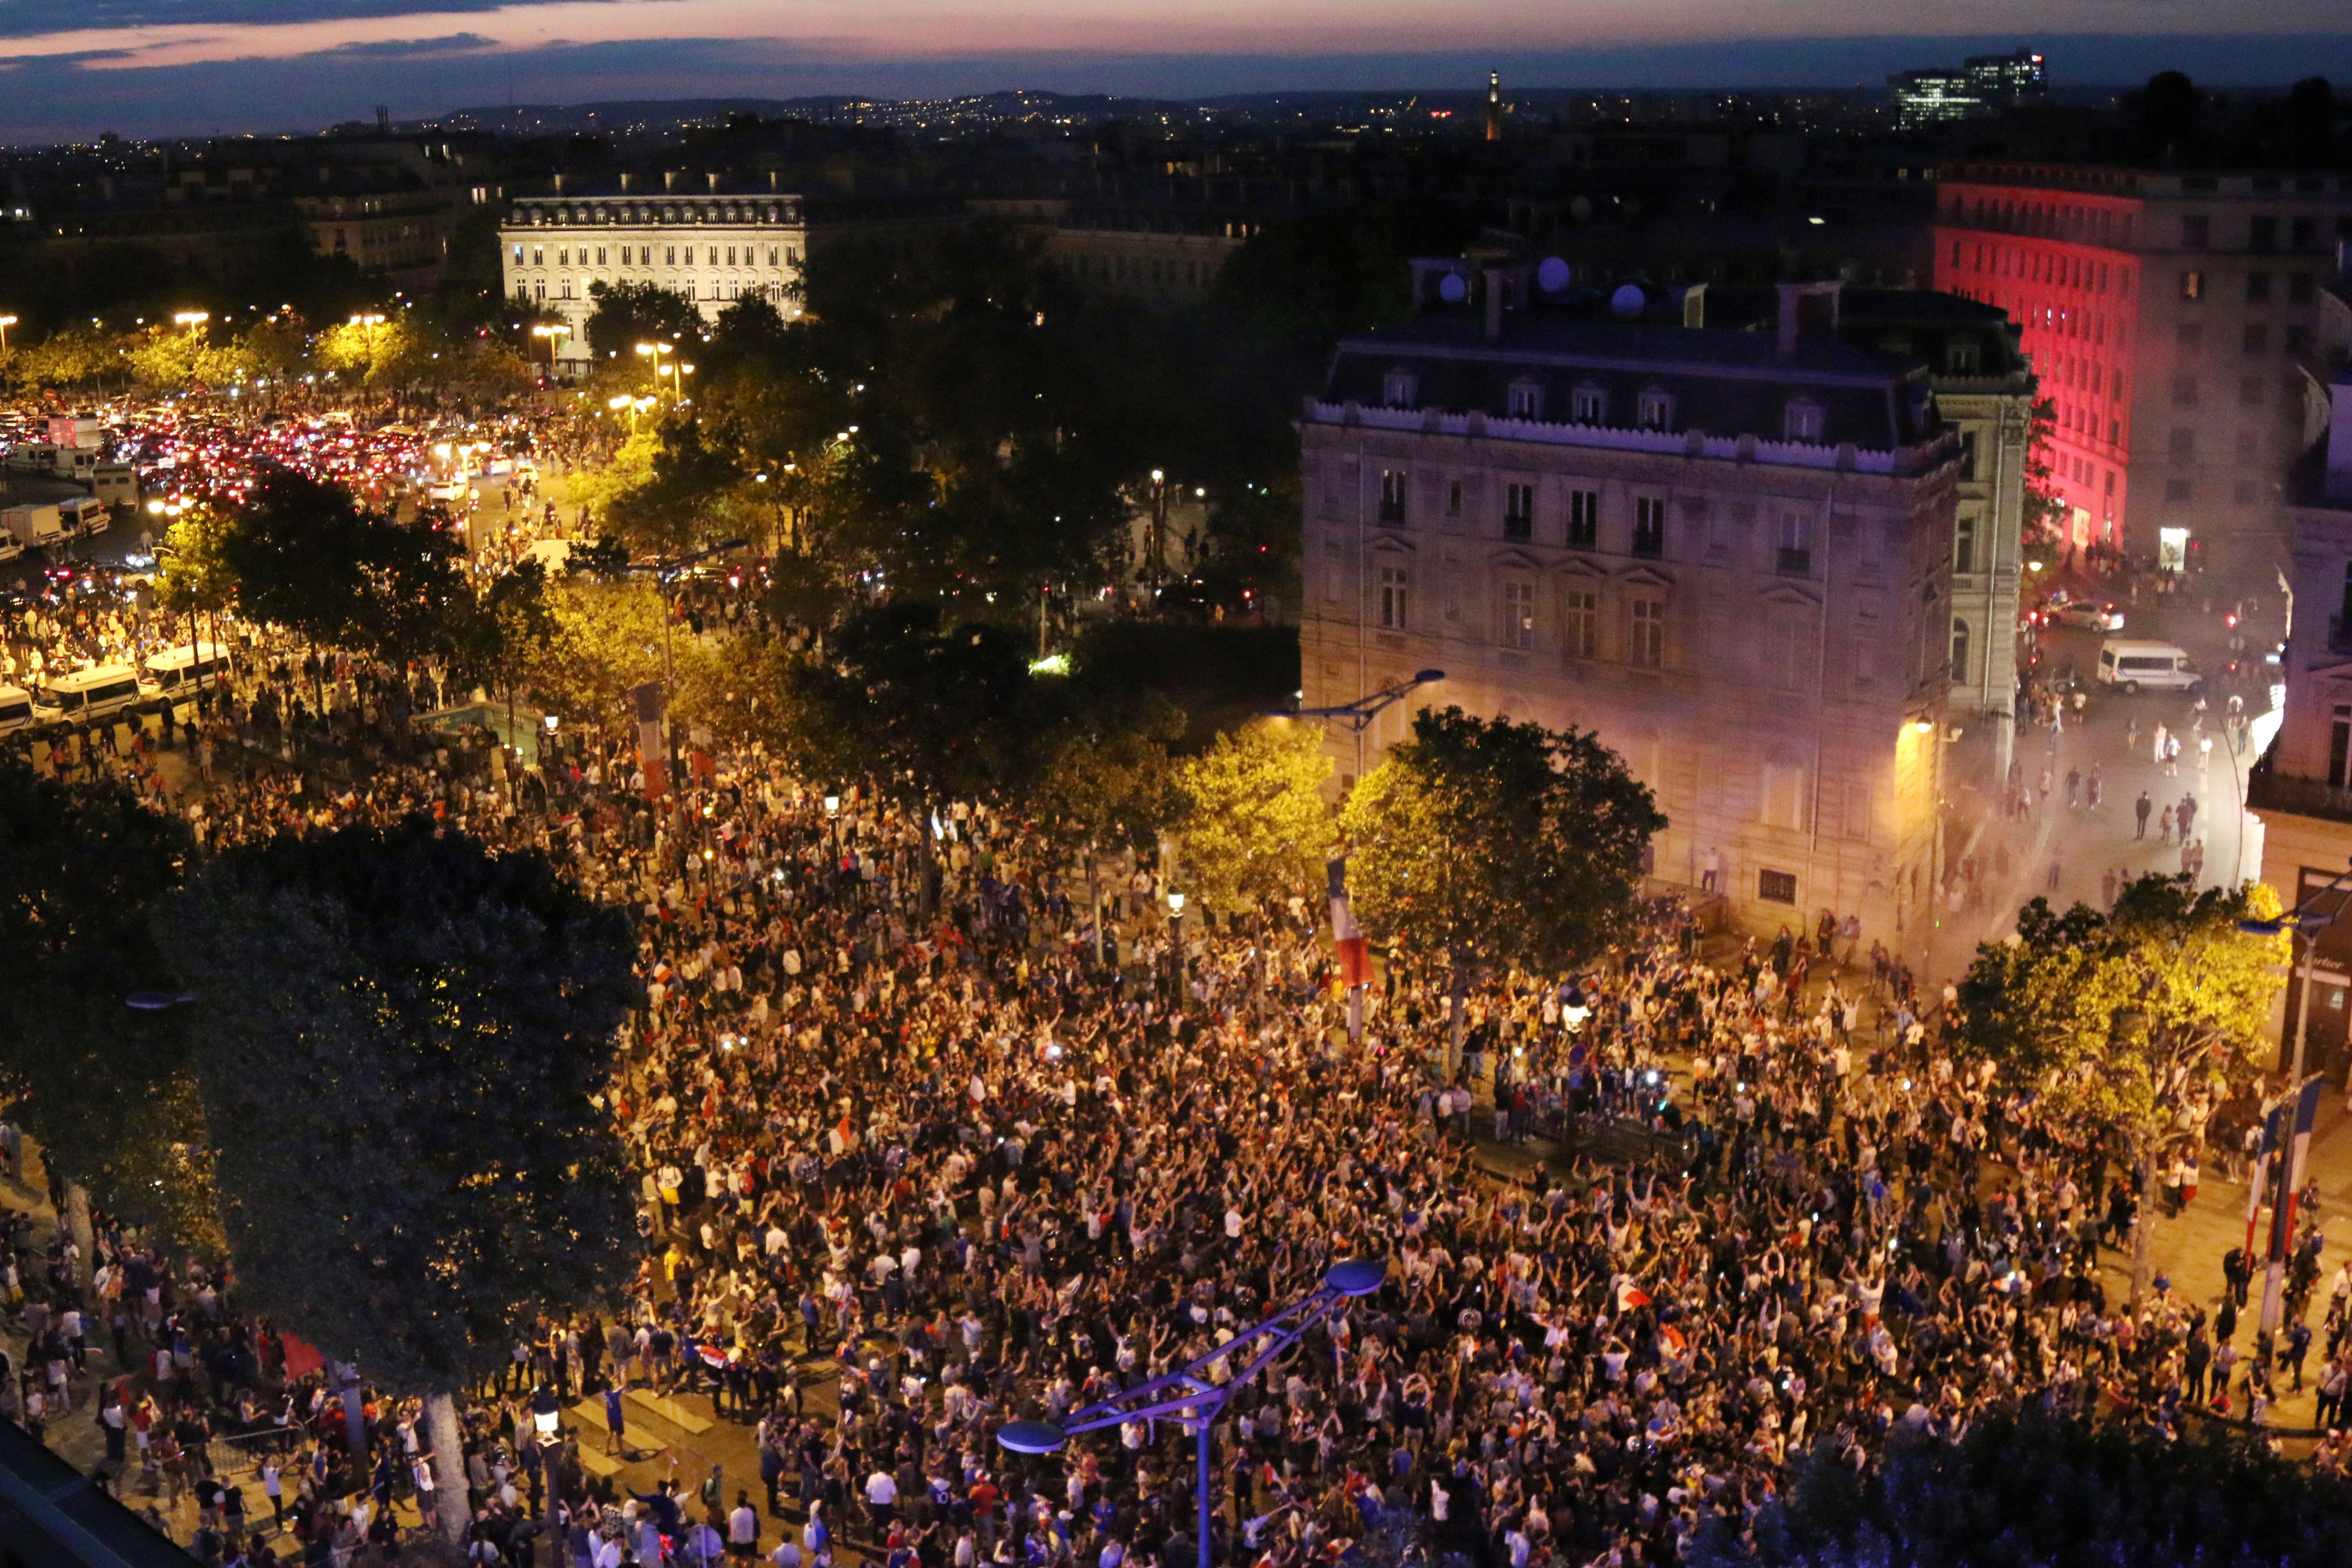 People celebrate France's victory on the Champs Elysee in Paris on July 10, 2018, after the final whistle of the Russia 2018 World Cup semi-final football match between France and Belgium. (Photo by ZAKARIA ABDELKAFI / AFP) (Photo credit should read ZAKARIA ABDELKAFI/AFP/Getty Images)